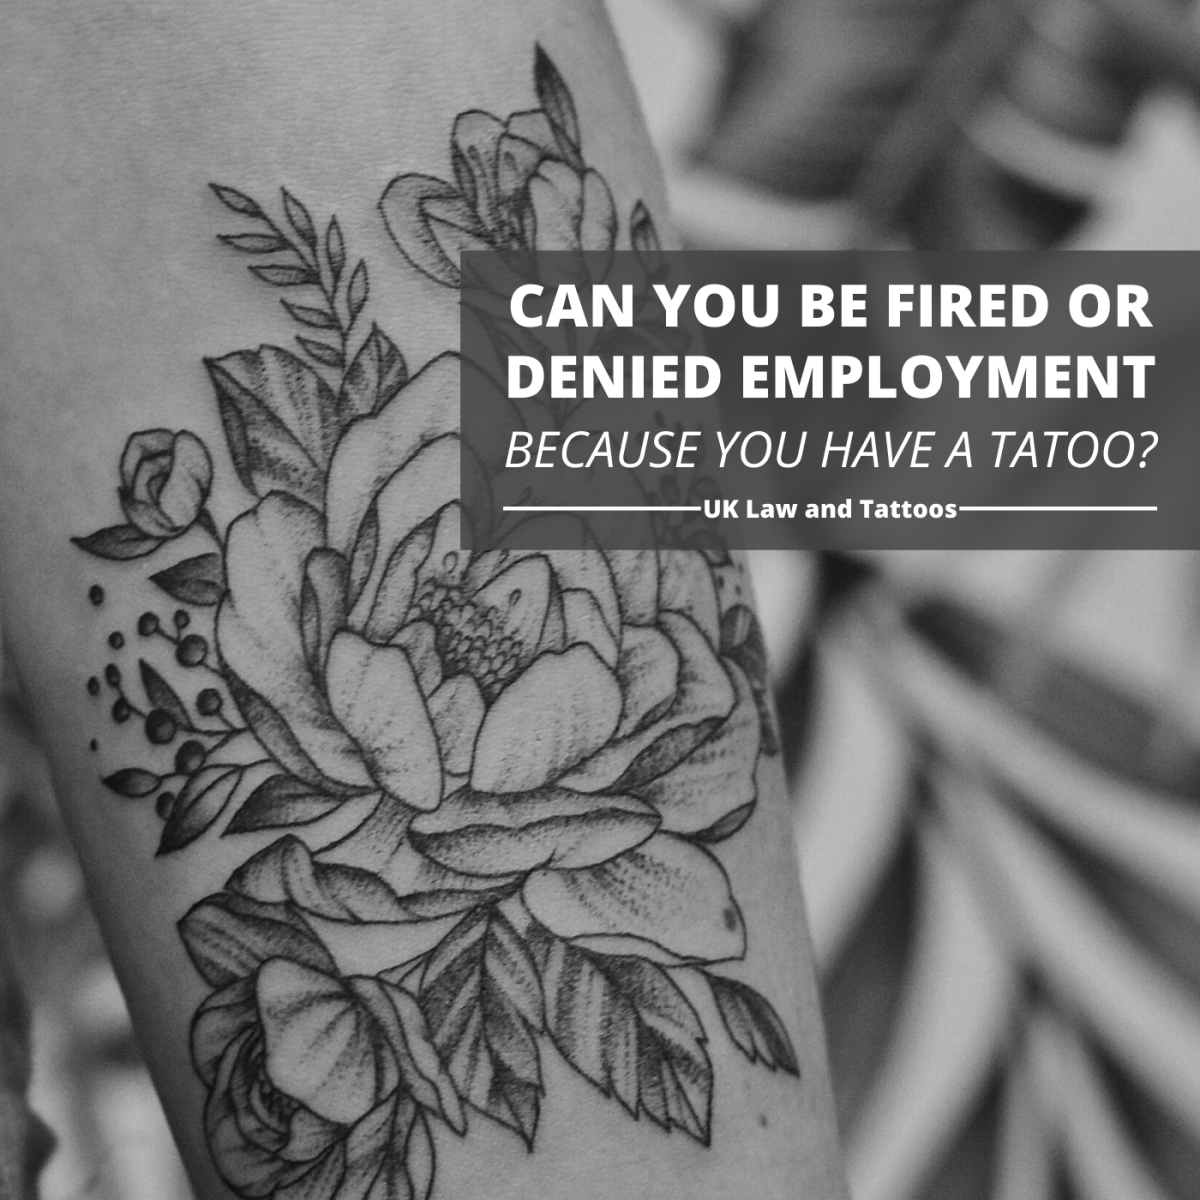 What does UK law say about employee rights when it comes to tattoos?